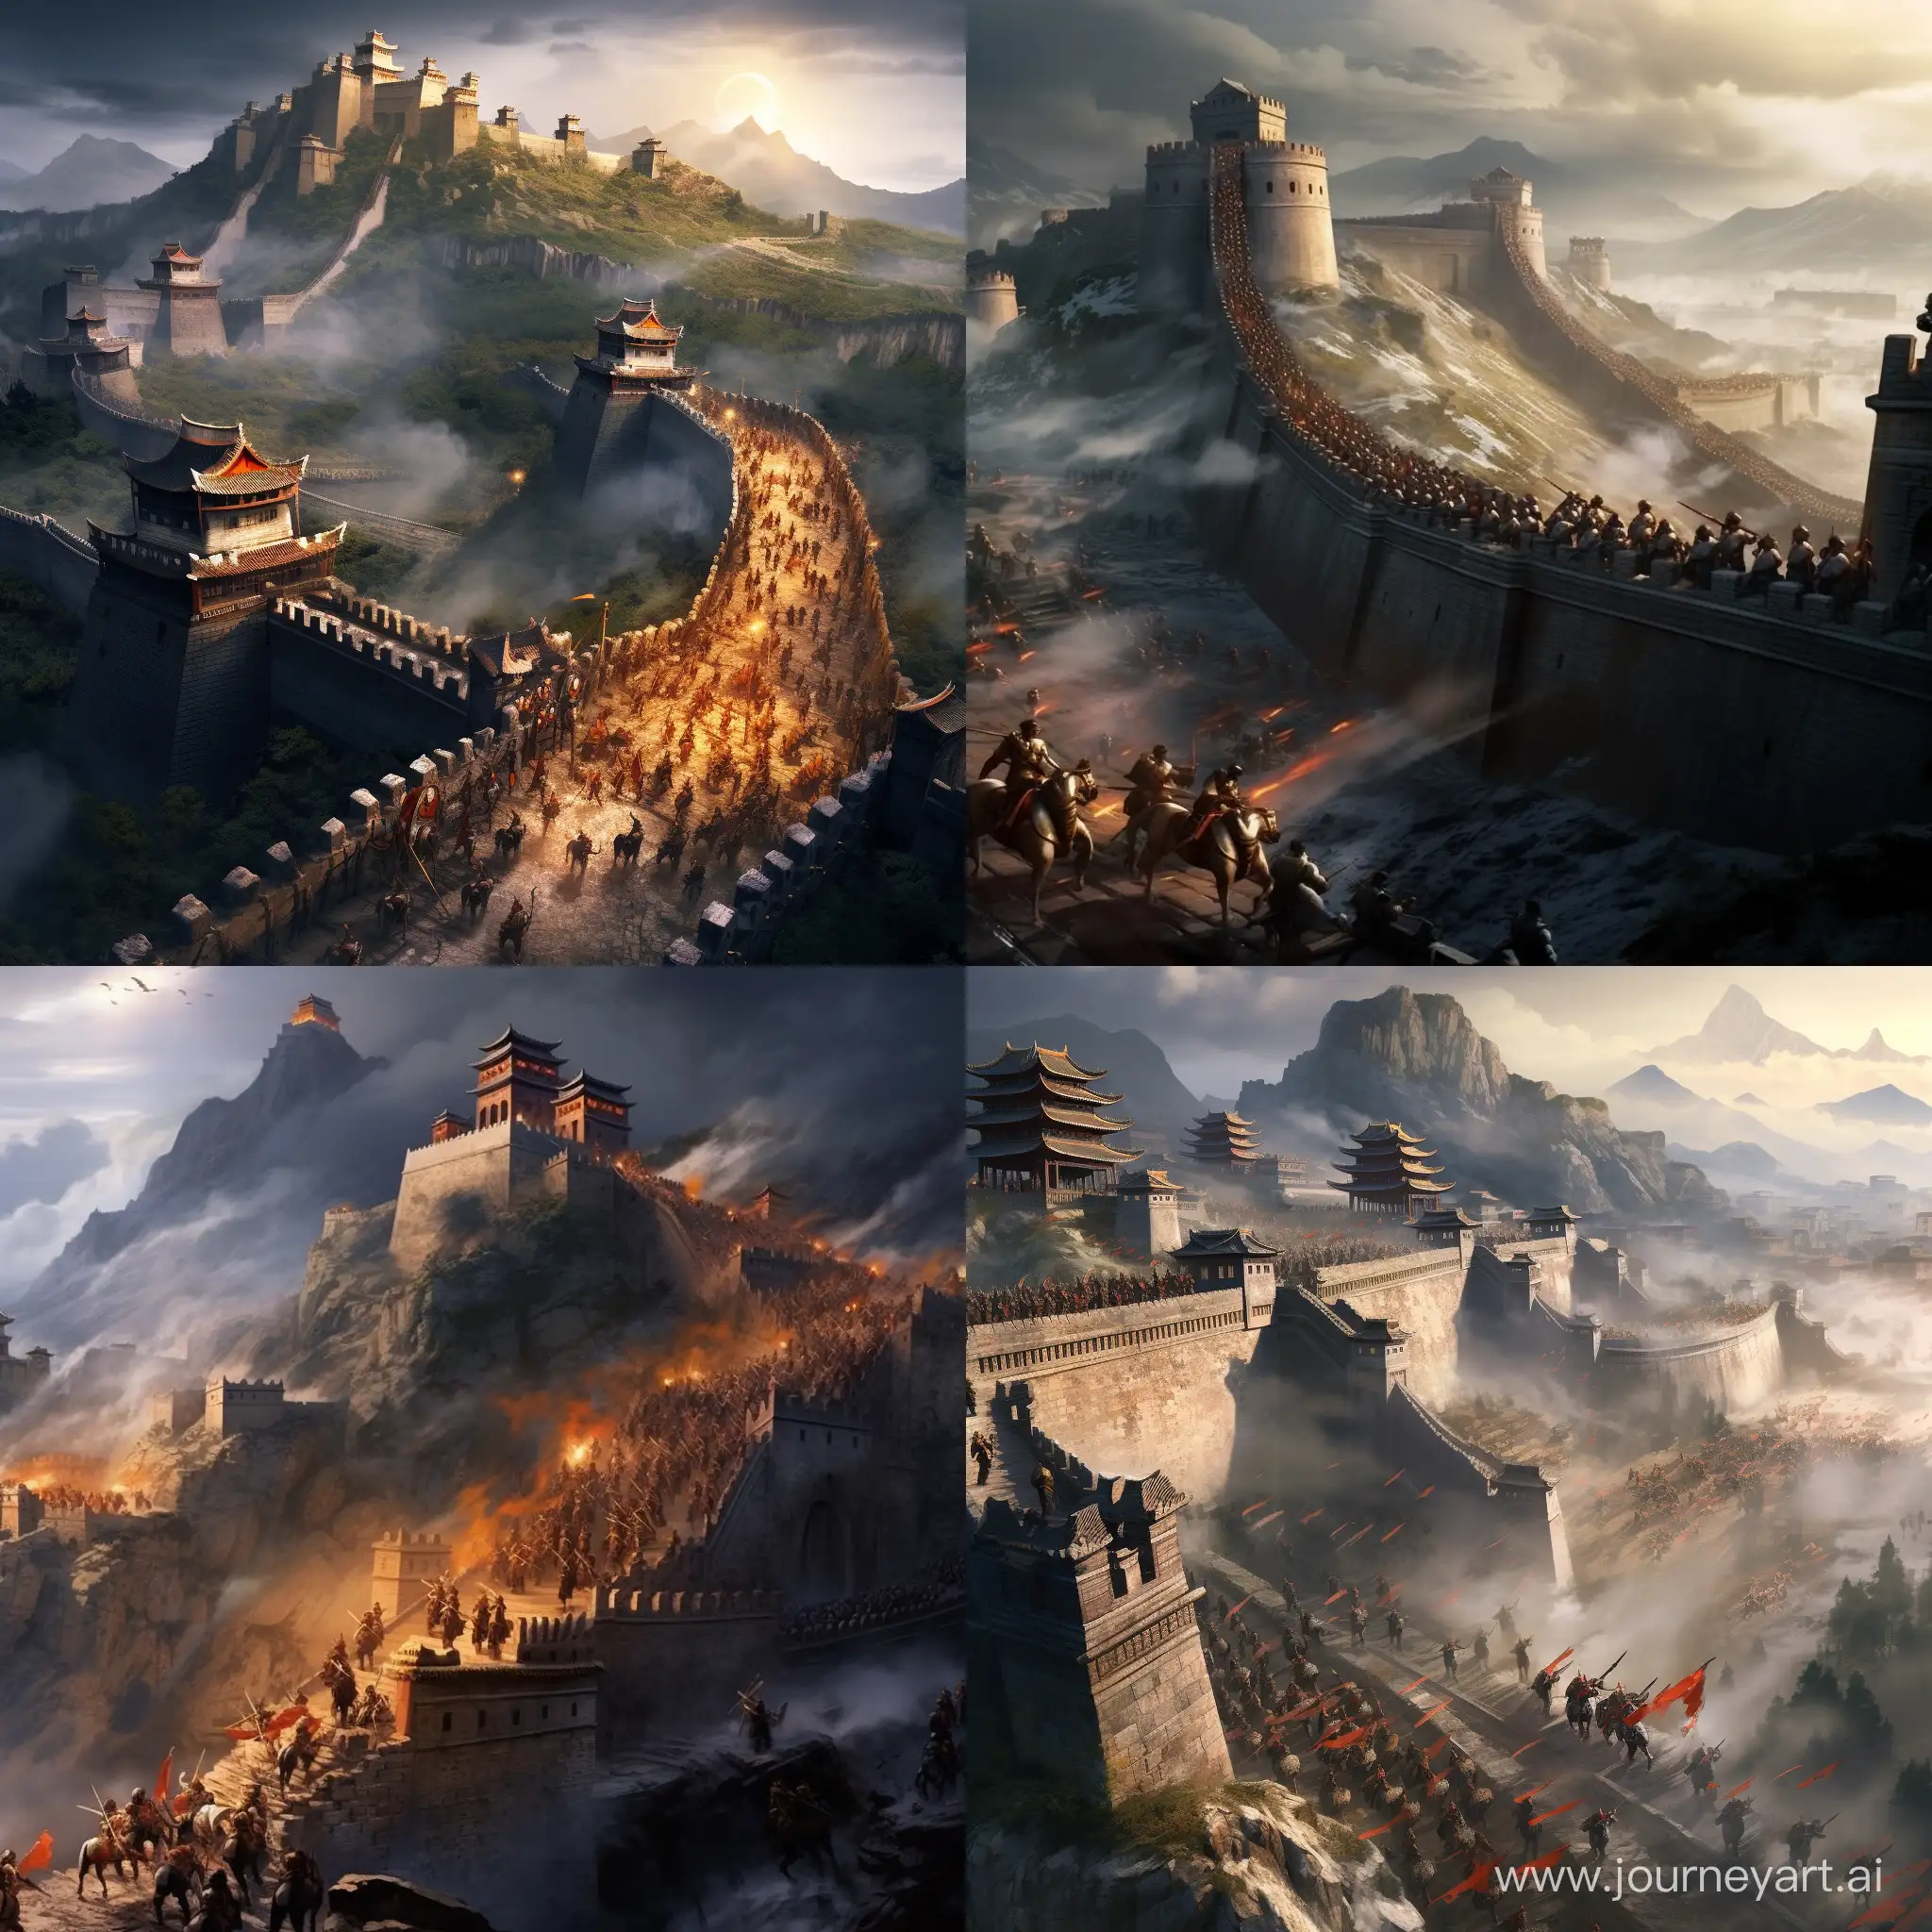 Turks-Breaking-Through-Great-Wall-of-China-in-3000-BC